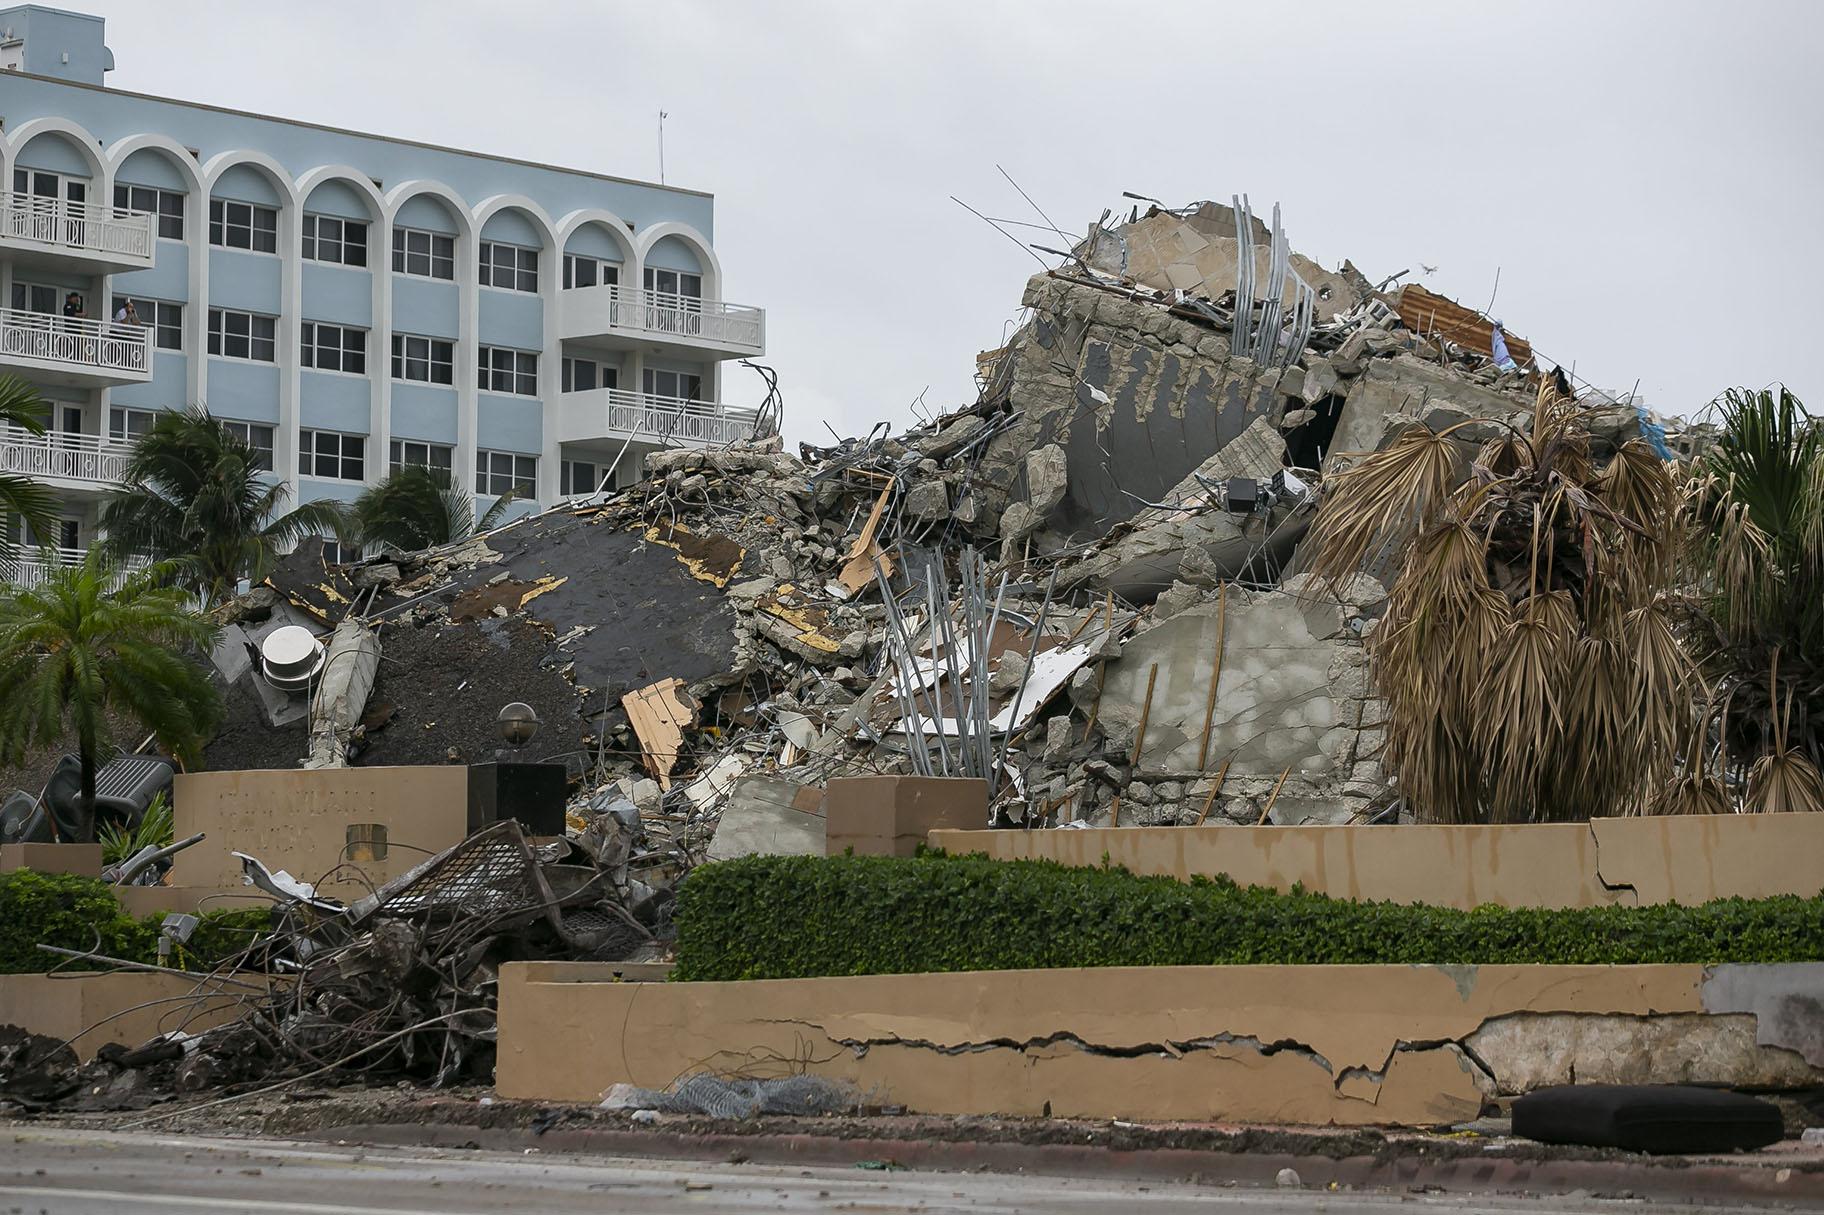 Rubble and debris of the Champlain Towers South condo can be seen Tuesday, July 6, 2021 in Surfside, Fla. (Carl Juste / Miami Herald via AP)